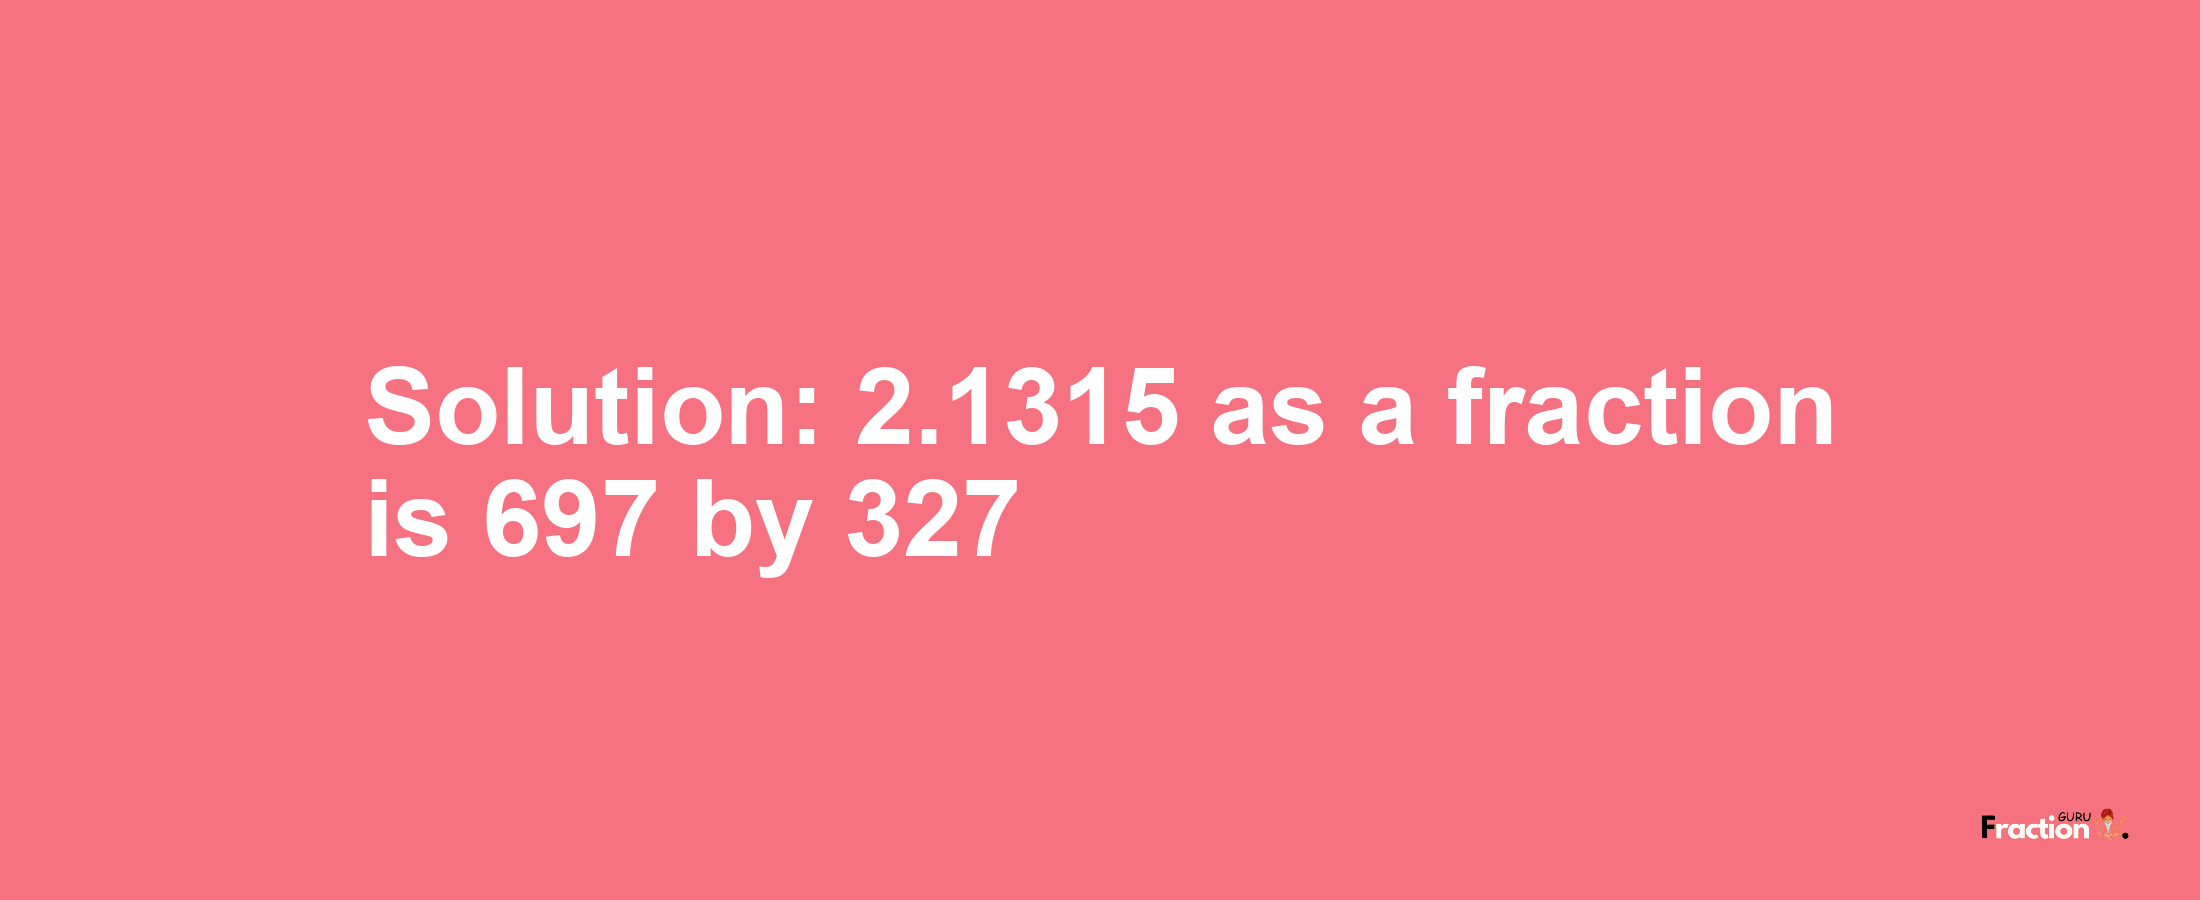 Solution:2.1315 as a fraction is 697/327